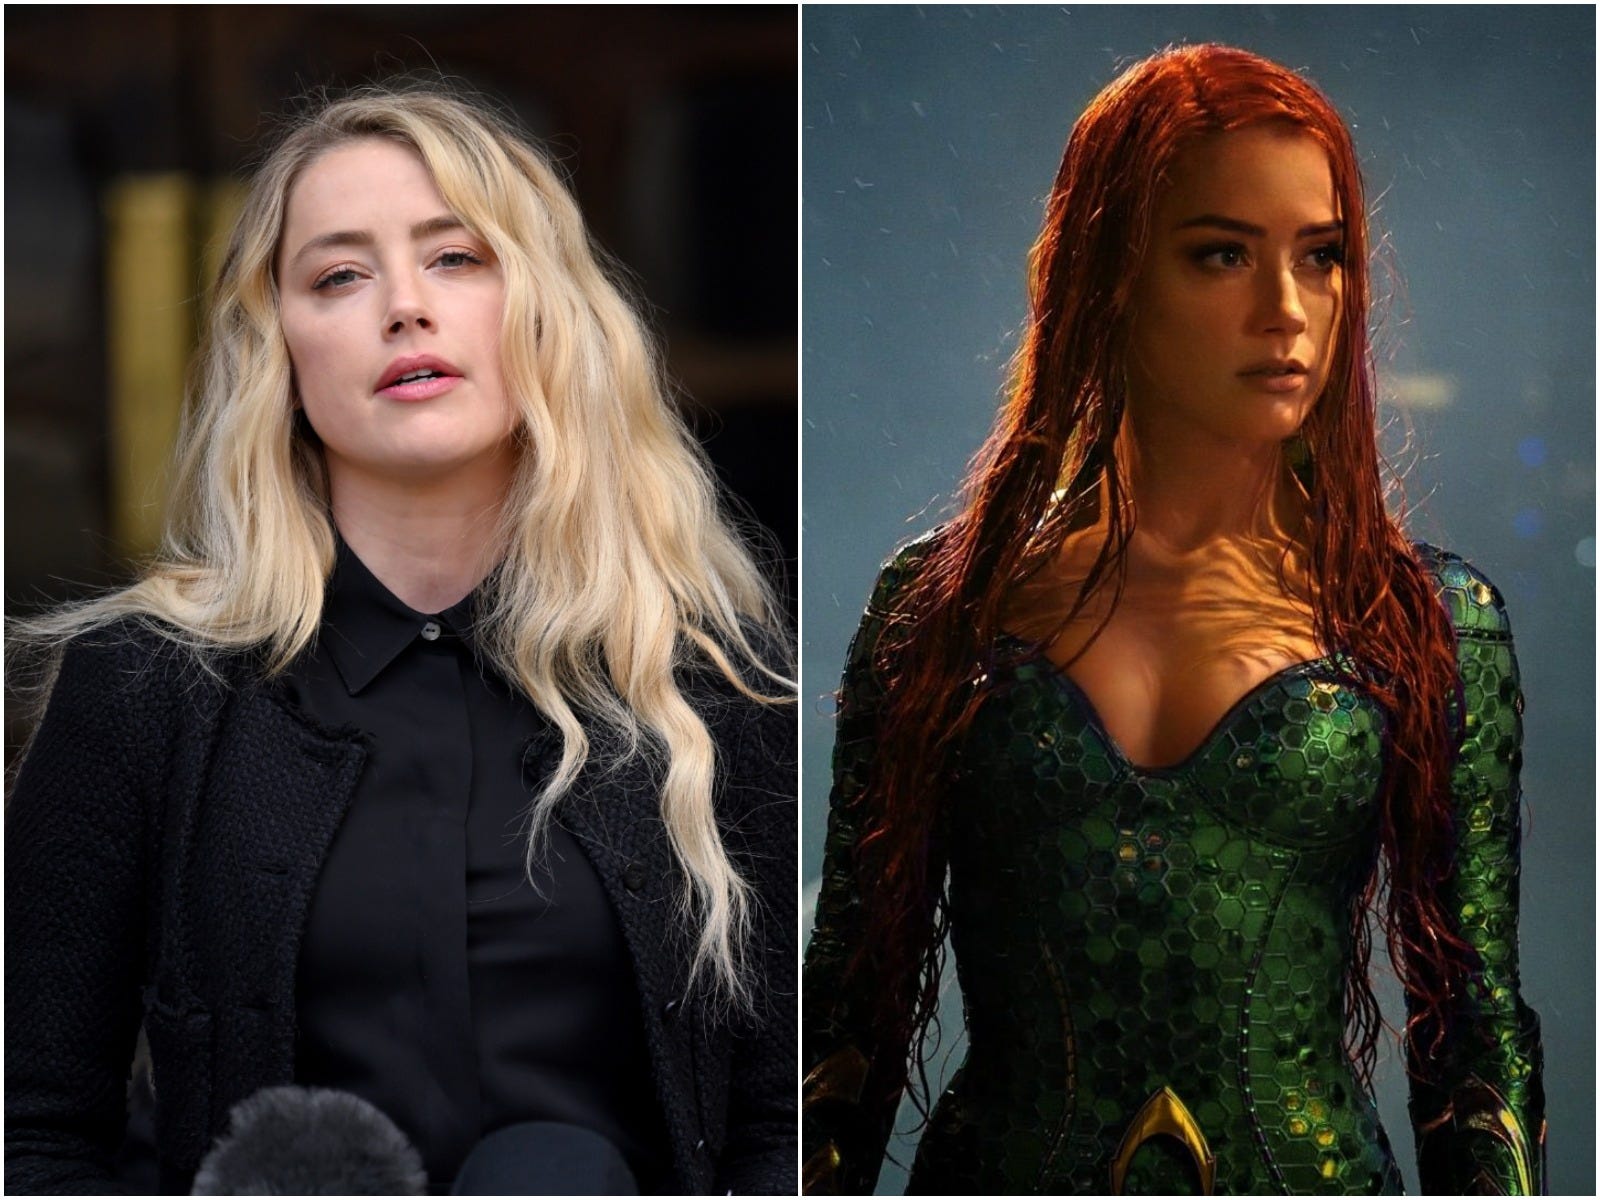 The Petition To Remove Amber Heard From Aquaman 2 Now Has Over 15